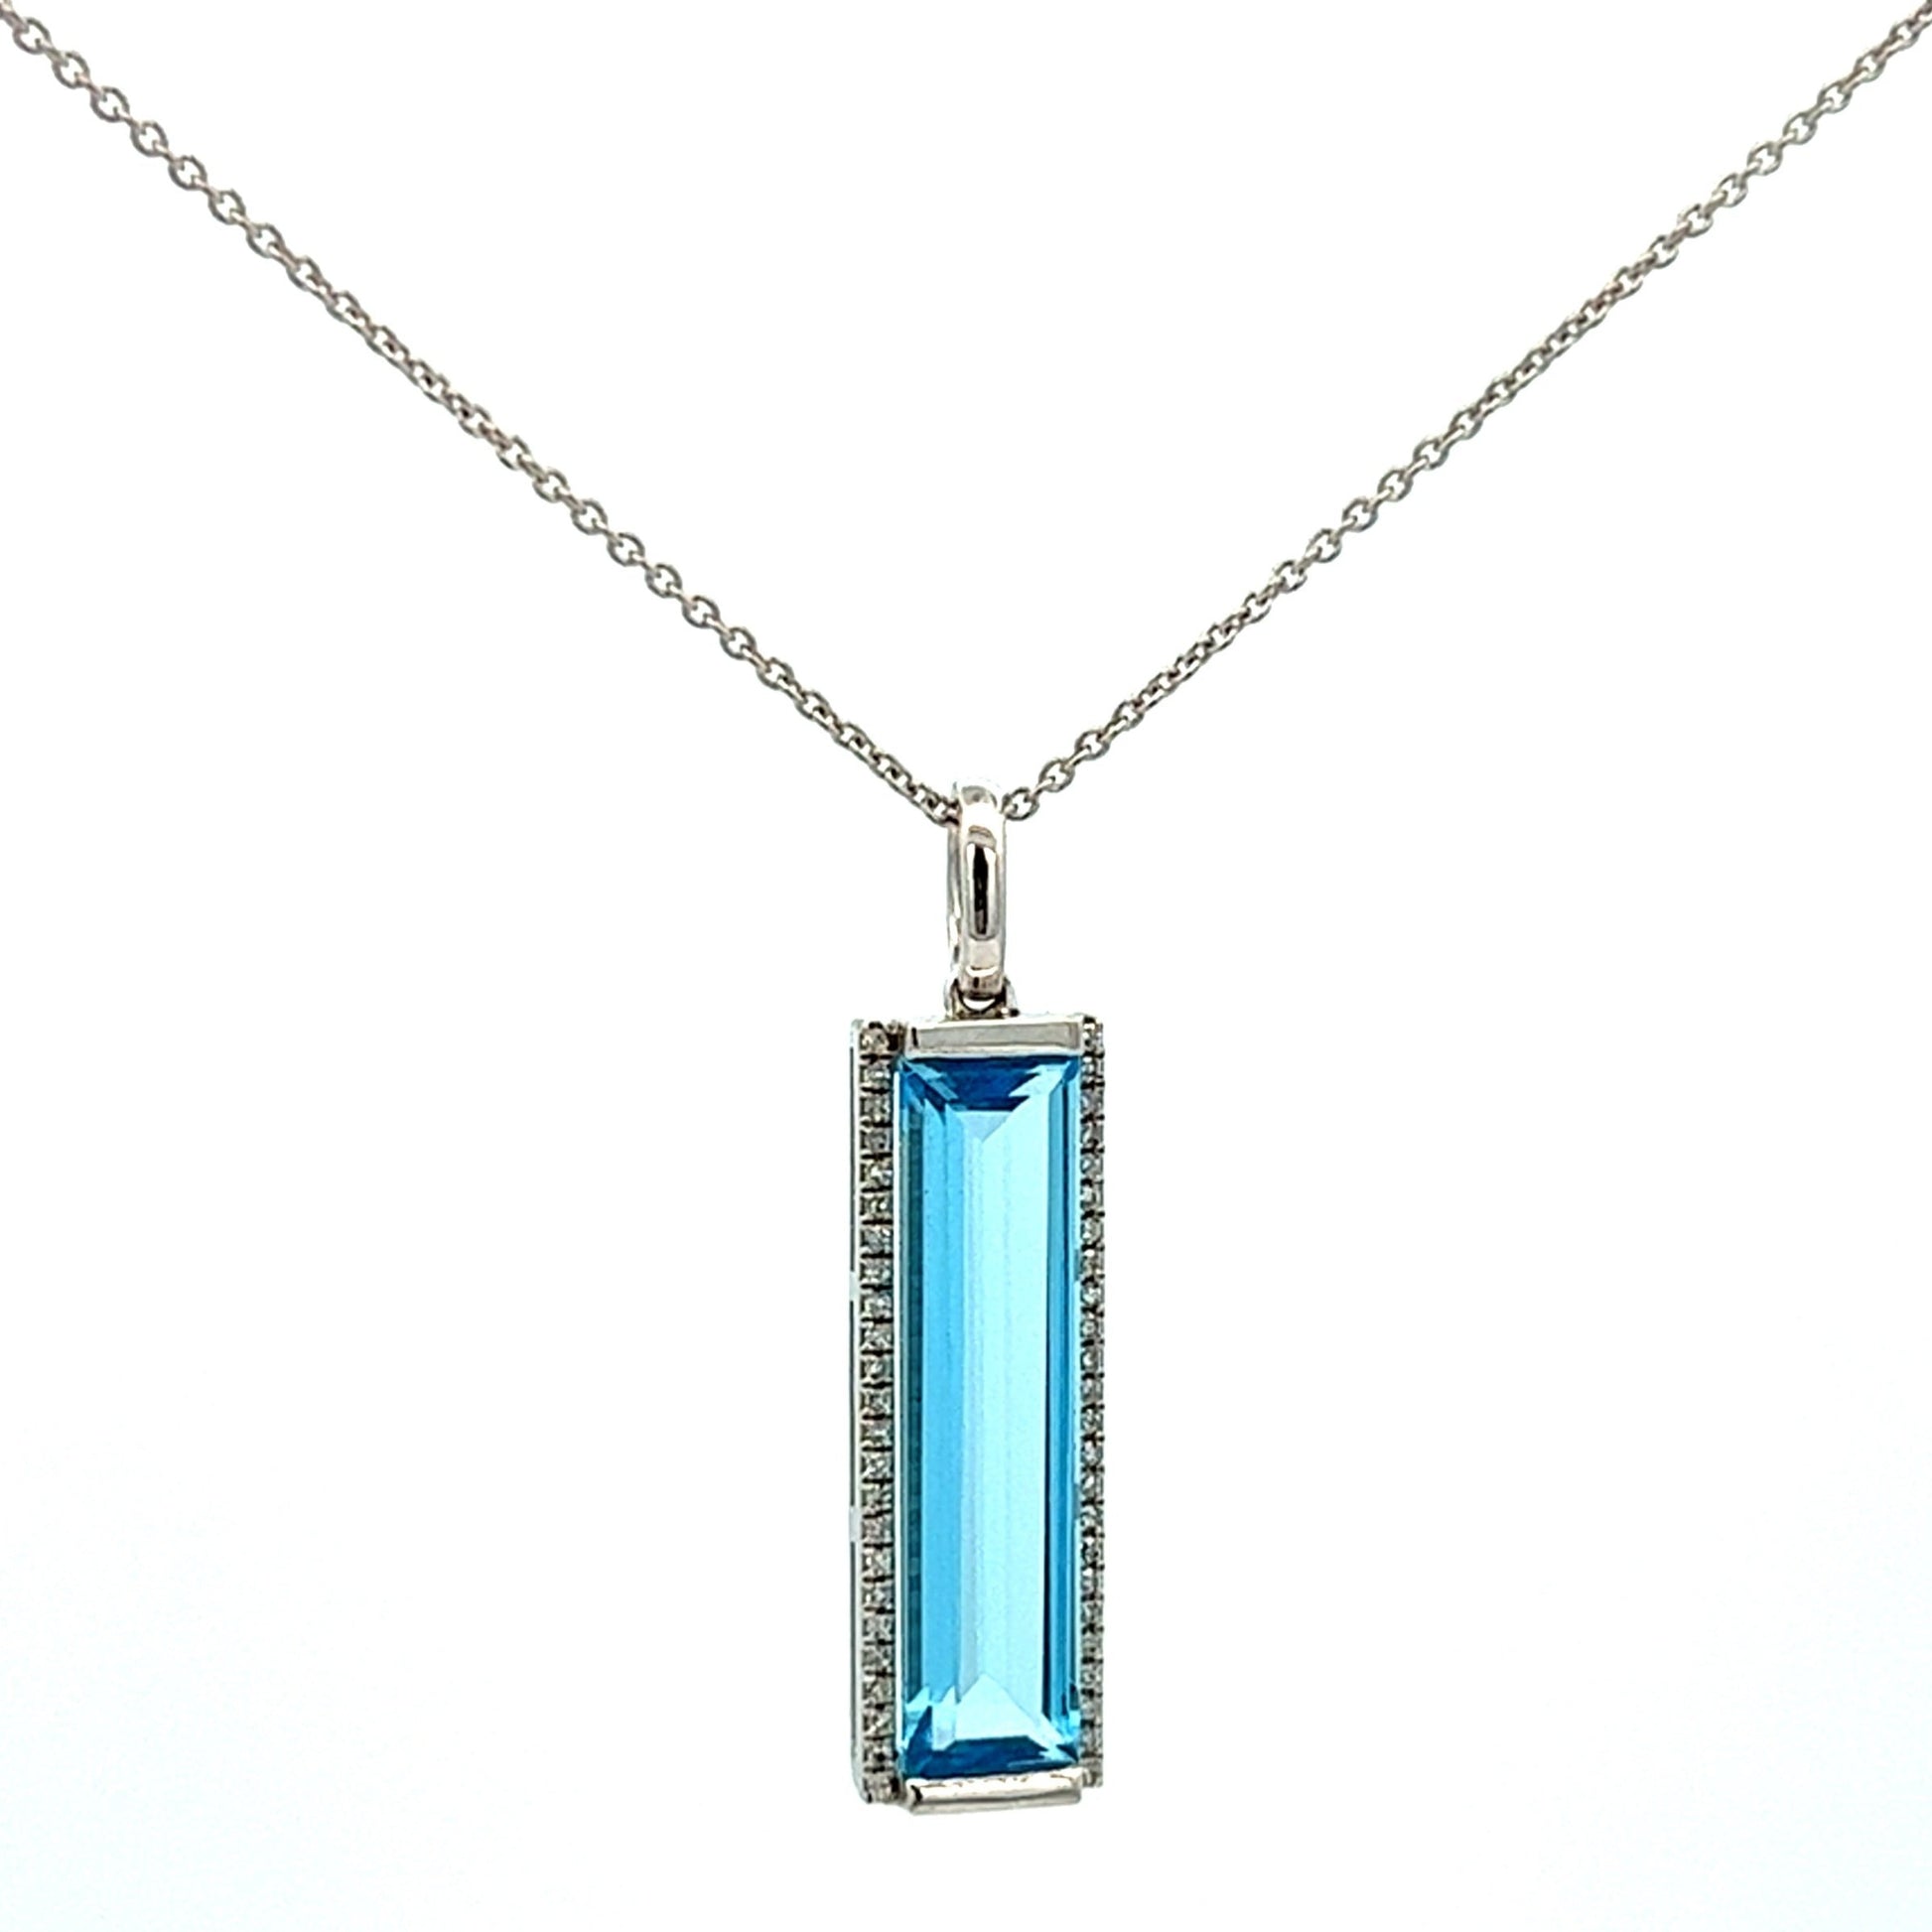 3.95cttw Blue Topaz Necklace with Diamonds | 14k White Gold